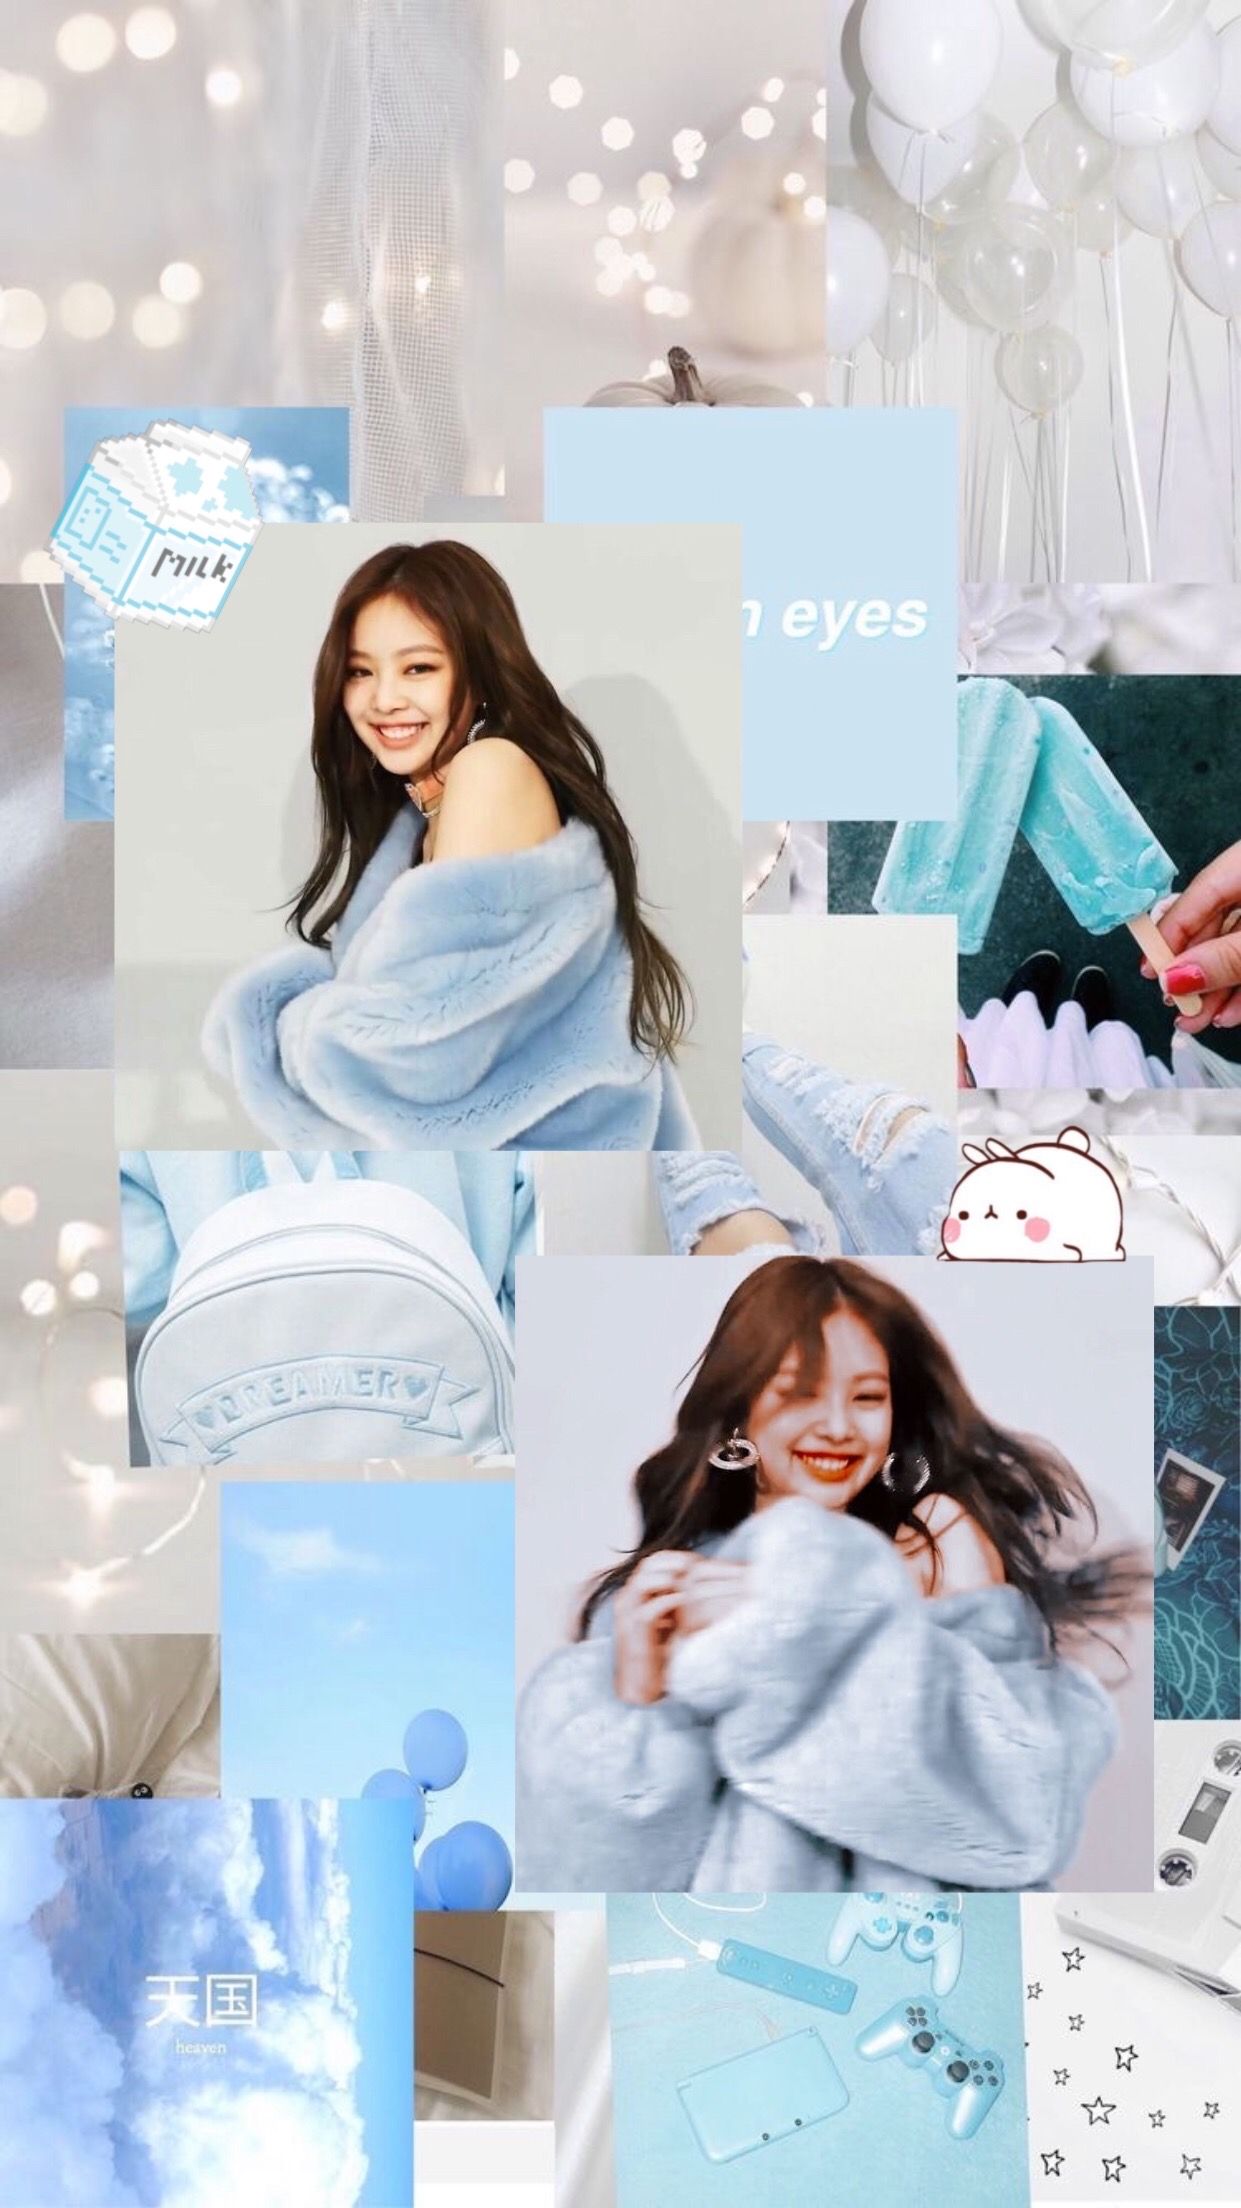 Aesthetic phone background of Lisa from Blackpink with blue and white colors - Jennie